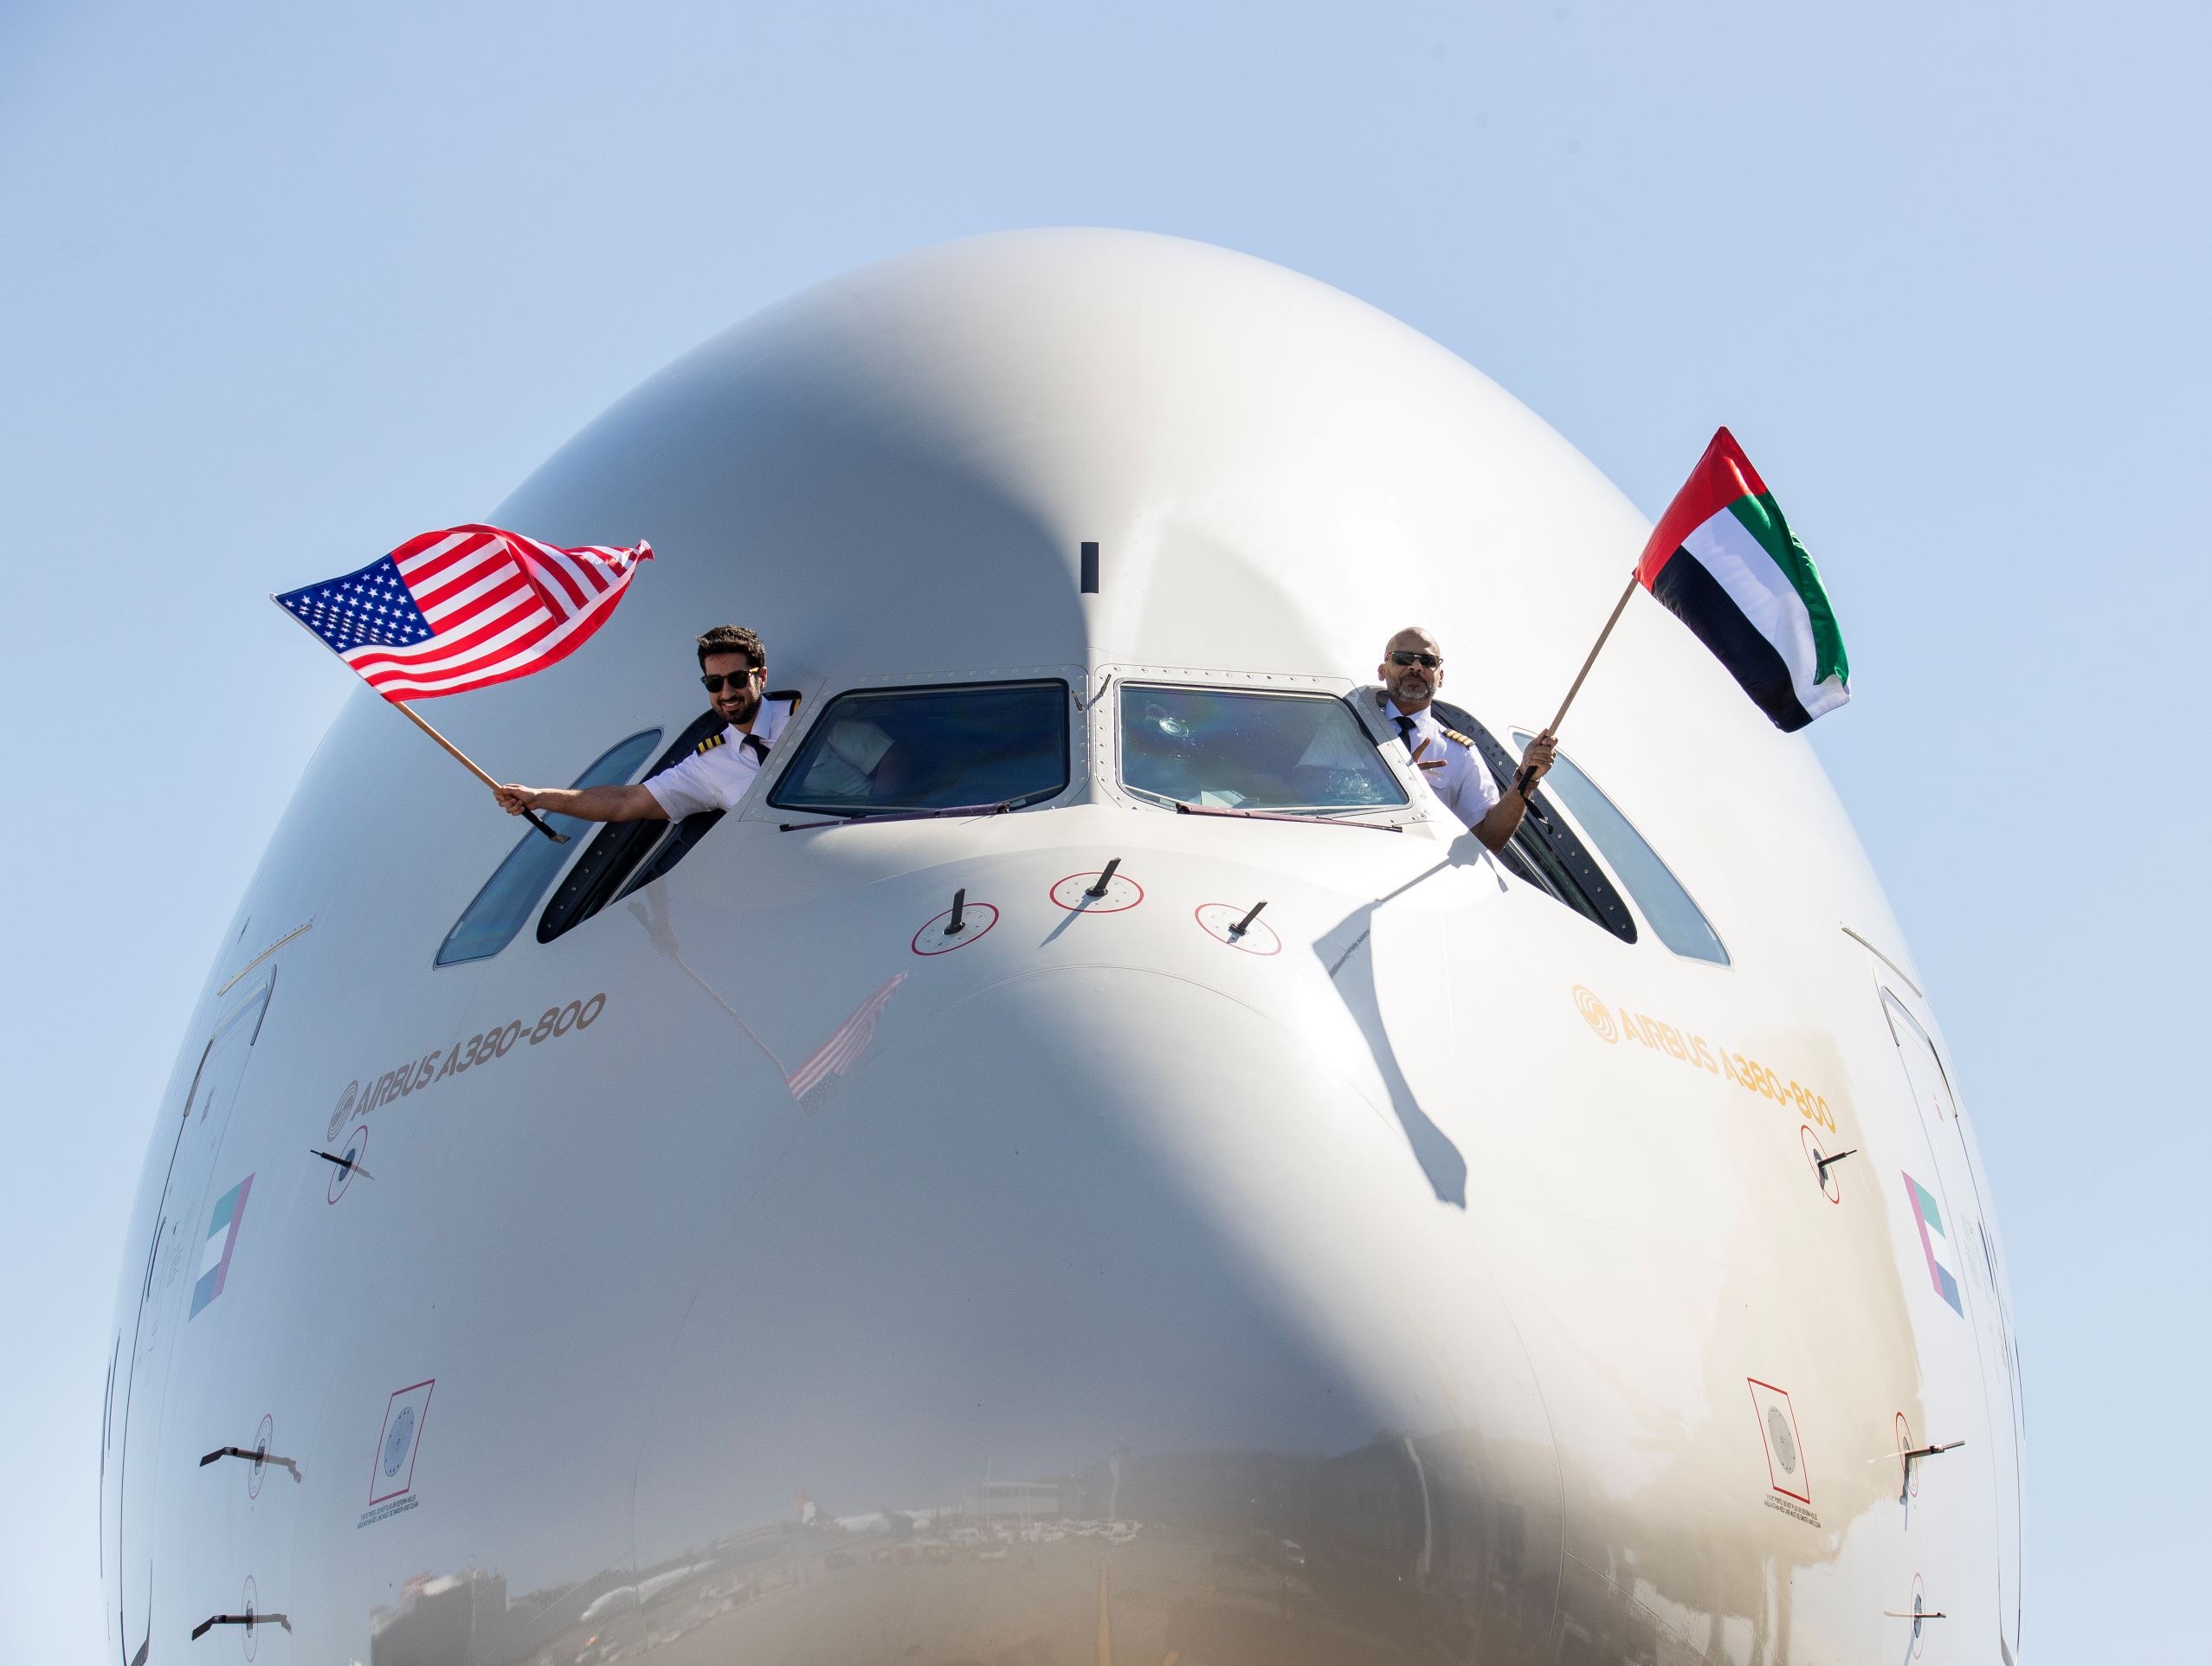 etihad launches 'airbus a380' to new york